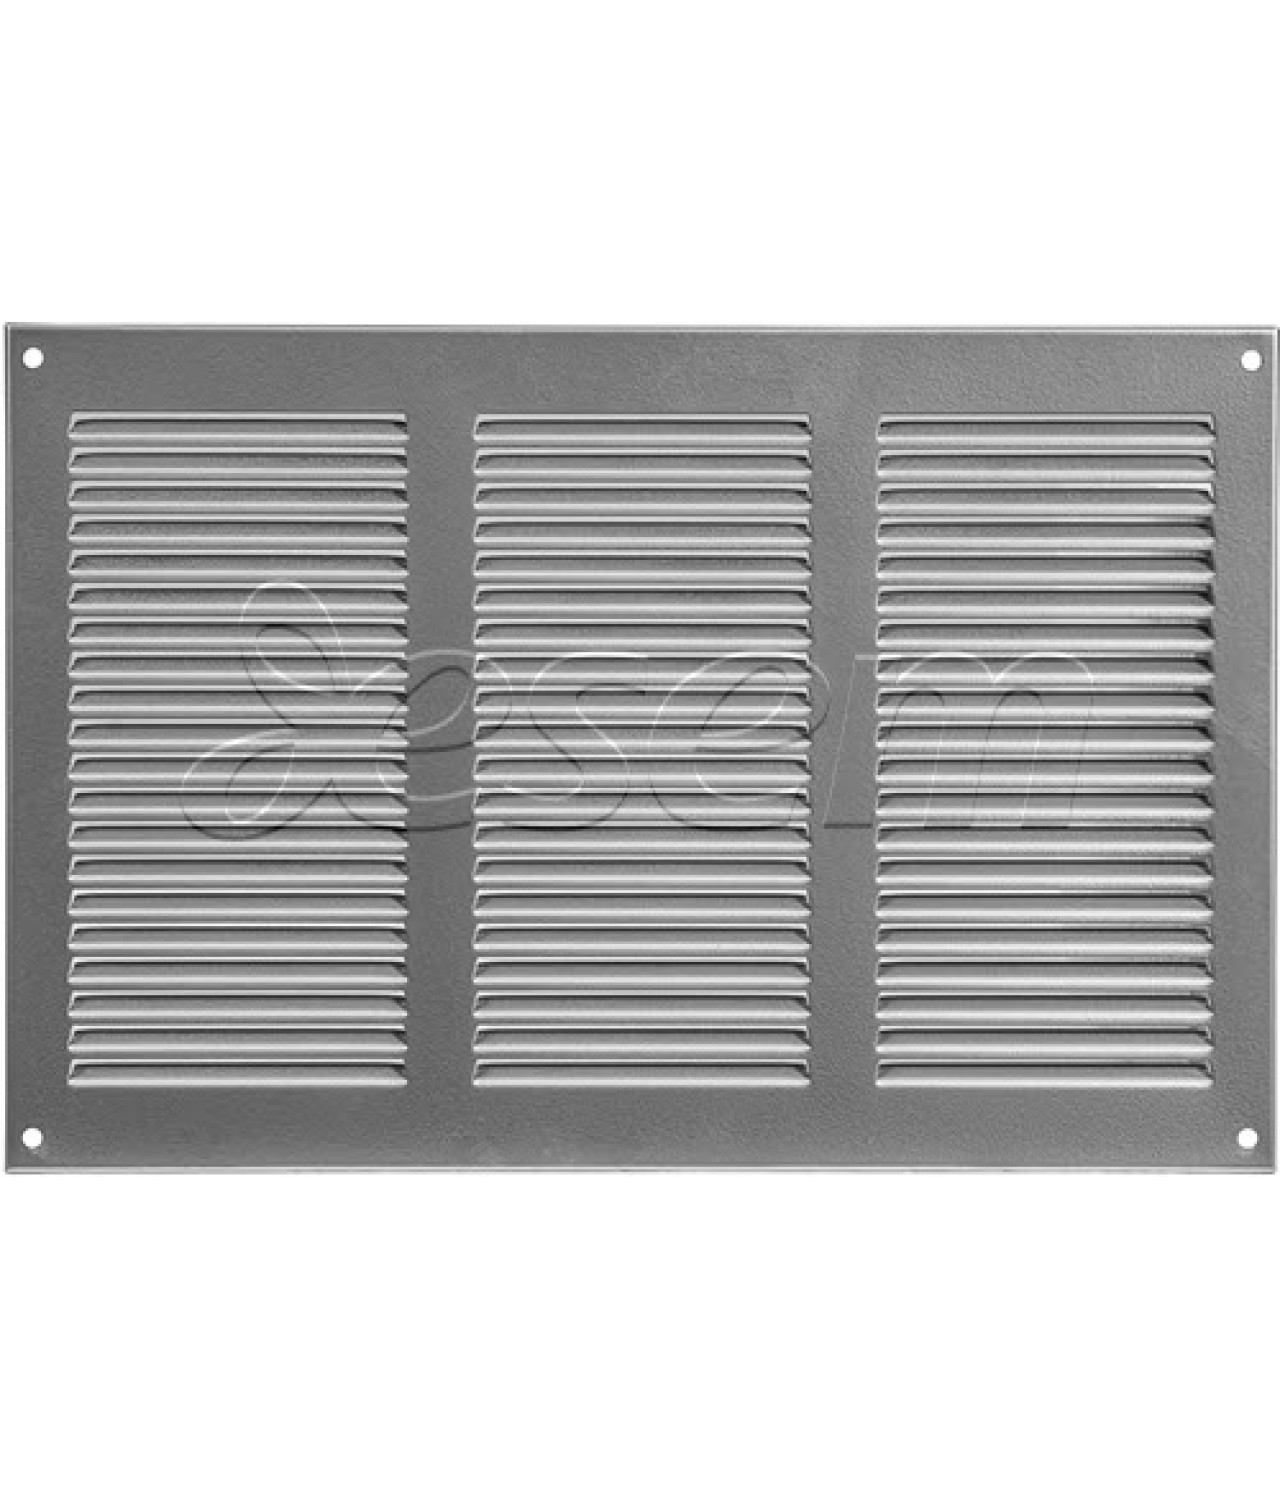 Metal vent cover EMS3020G 300x200 mm